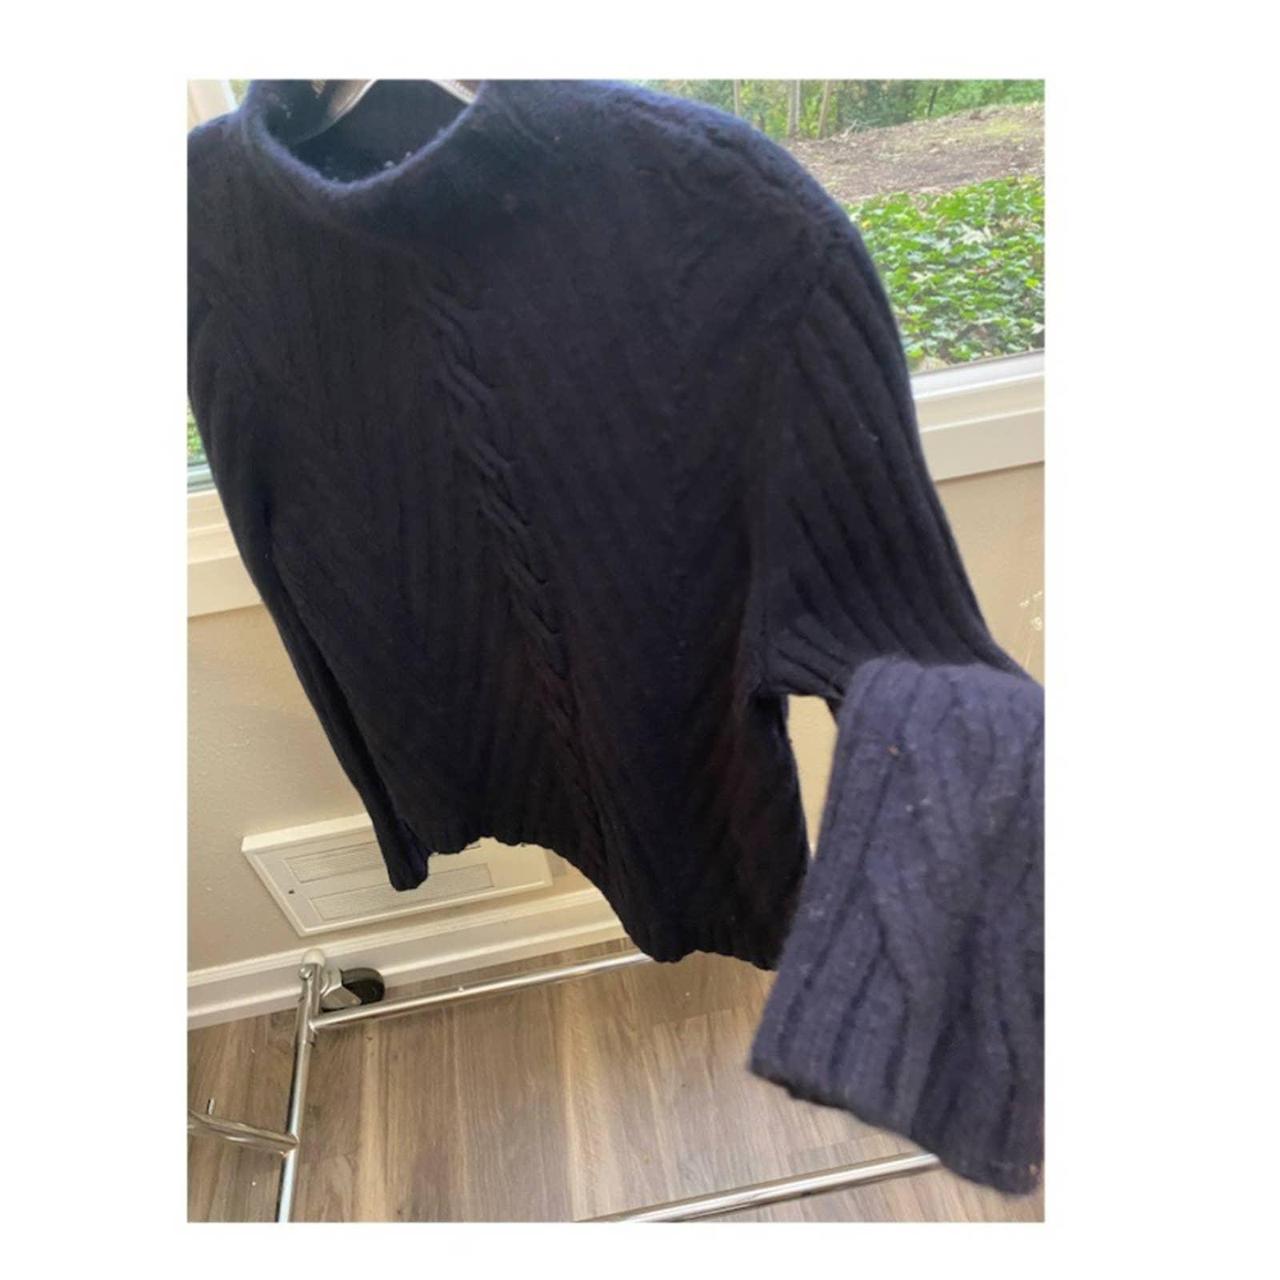 Product Image 3 - Cable Knit Wool Sweater

East coast